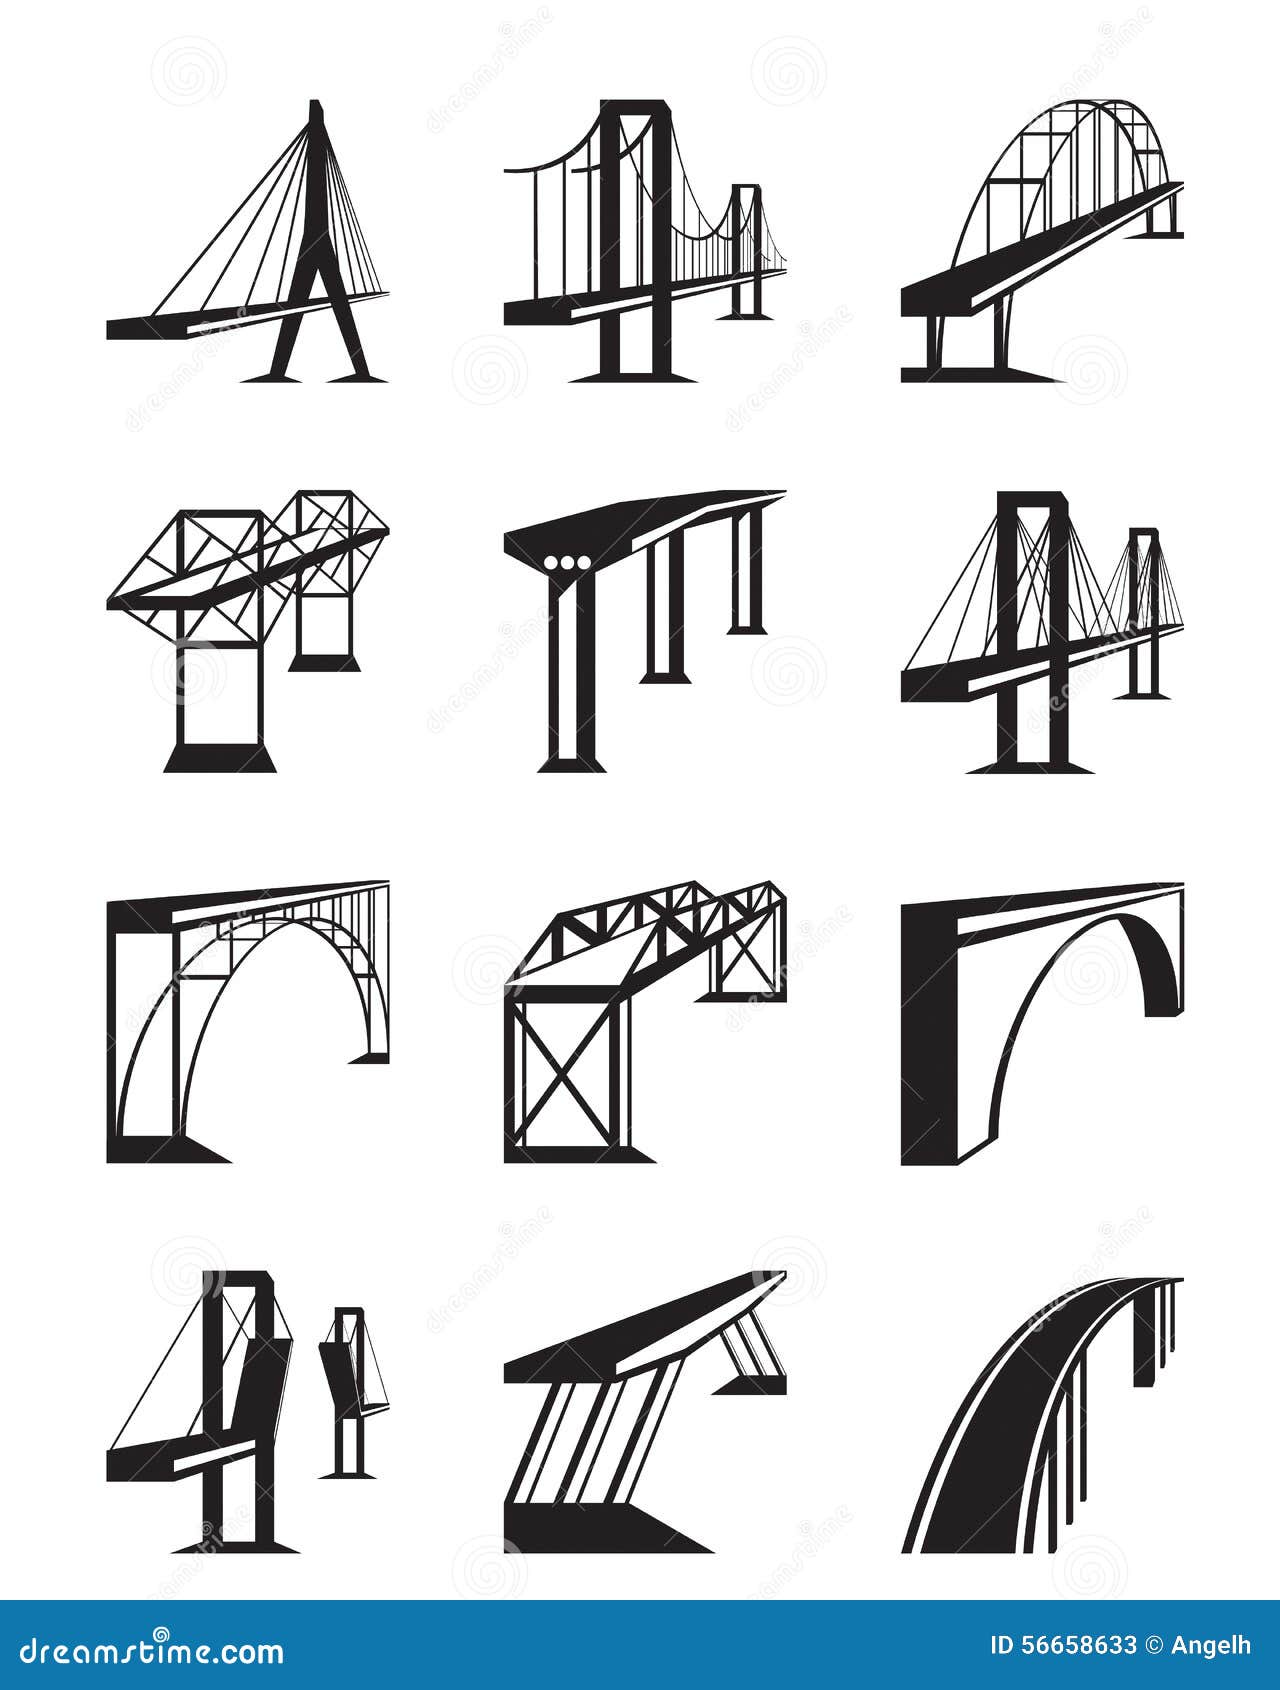 Various Types Of Bridges In Perspective Stock Vector - Image: 56658633